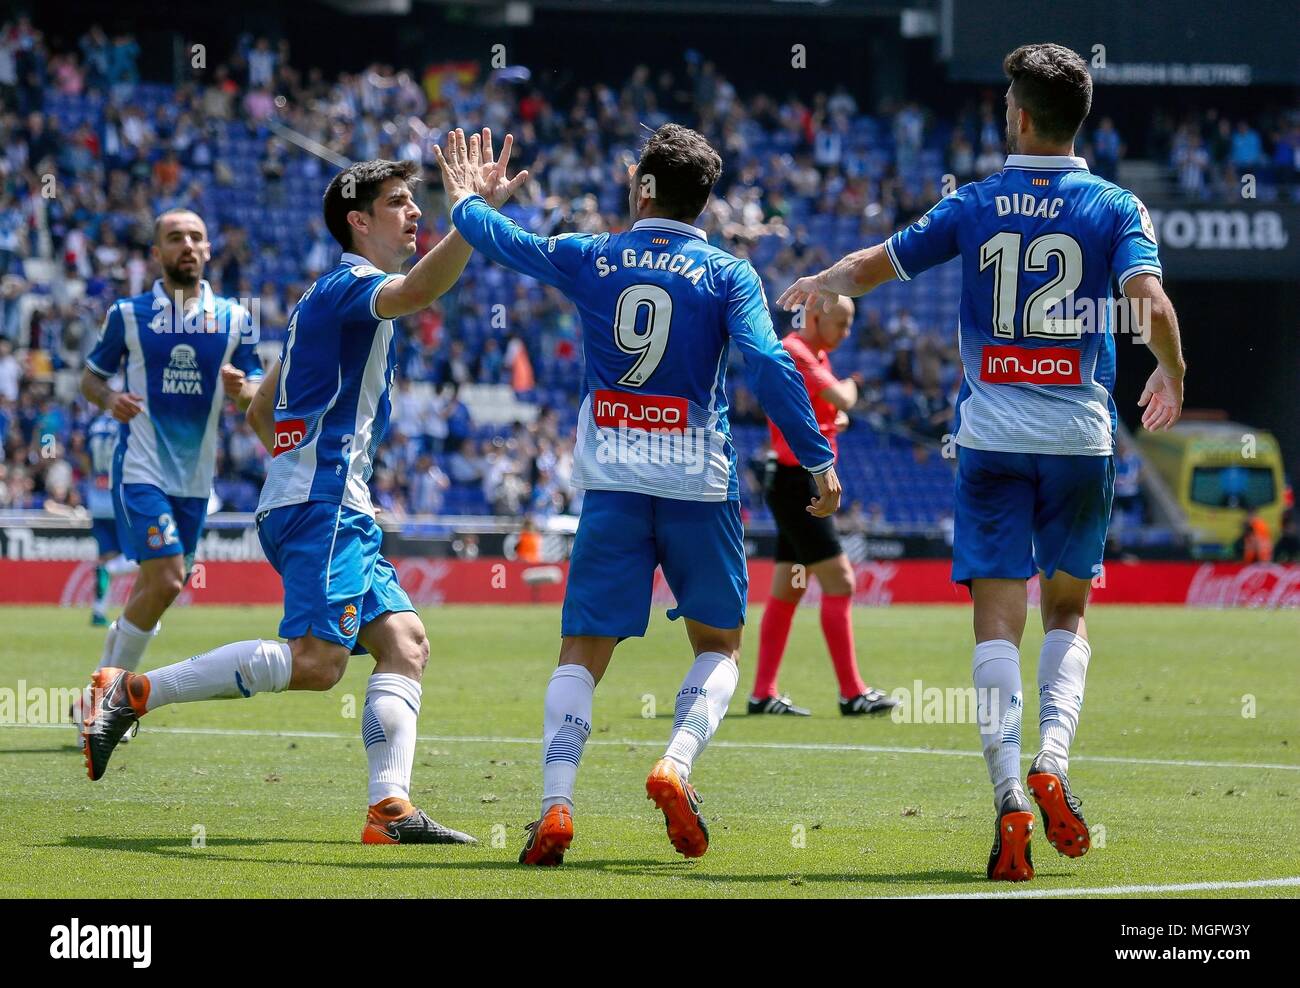 Barcelona, Spain. 28th Apr, 2018. RCD Espanyol's Gerard Moreno (2nd L) celebrates with Sergio Garcia (2nd R) during a Spanish league match between RCD Espanyol and Las Palmas in Barcelona, Spain, on April 28, 2018. The match ended 1-1. Credit: Joan Gosa/Xinhua/Alamy Live News Stock Photo